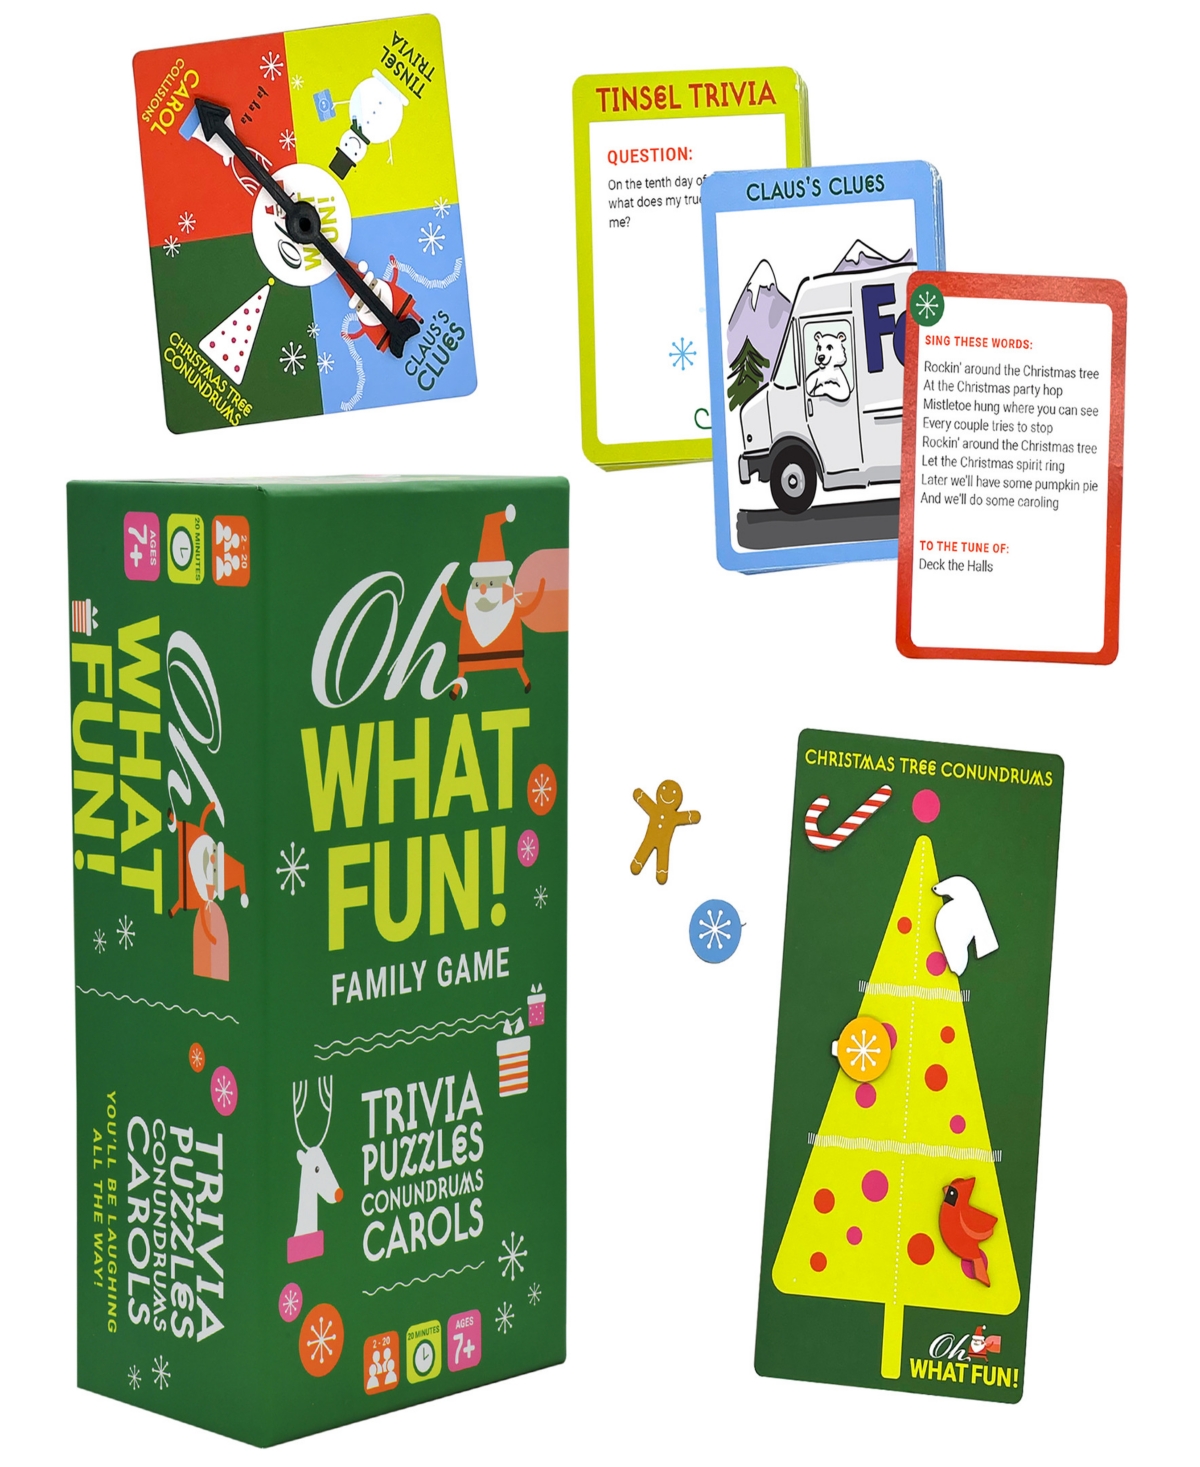 Shop Project Genius Oh What Fun Holiday, Family, Party, Trivia Game Solve Christmas Trivia And Puzzles In Multi